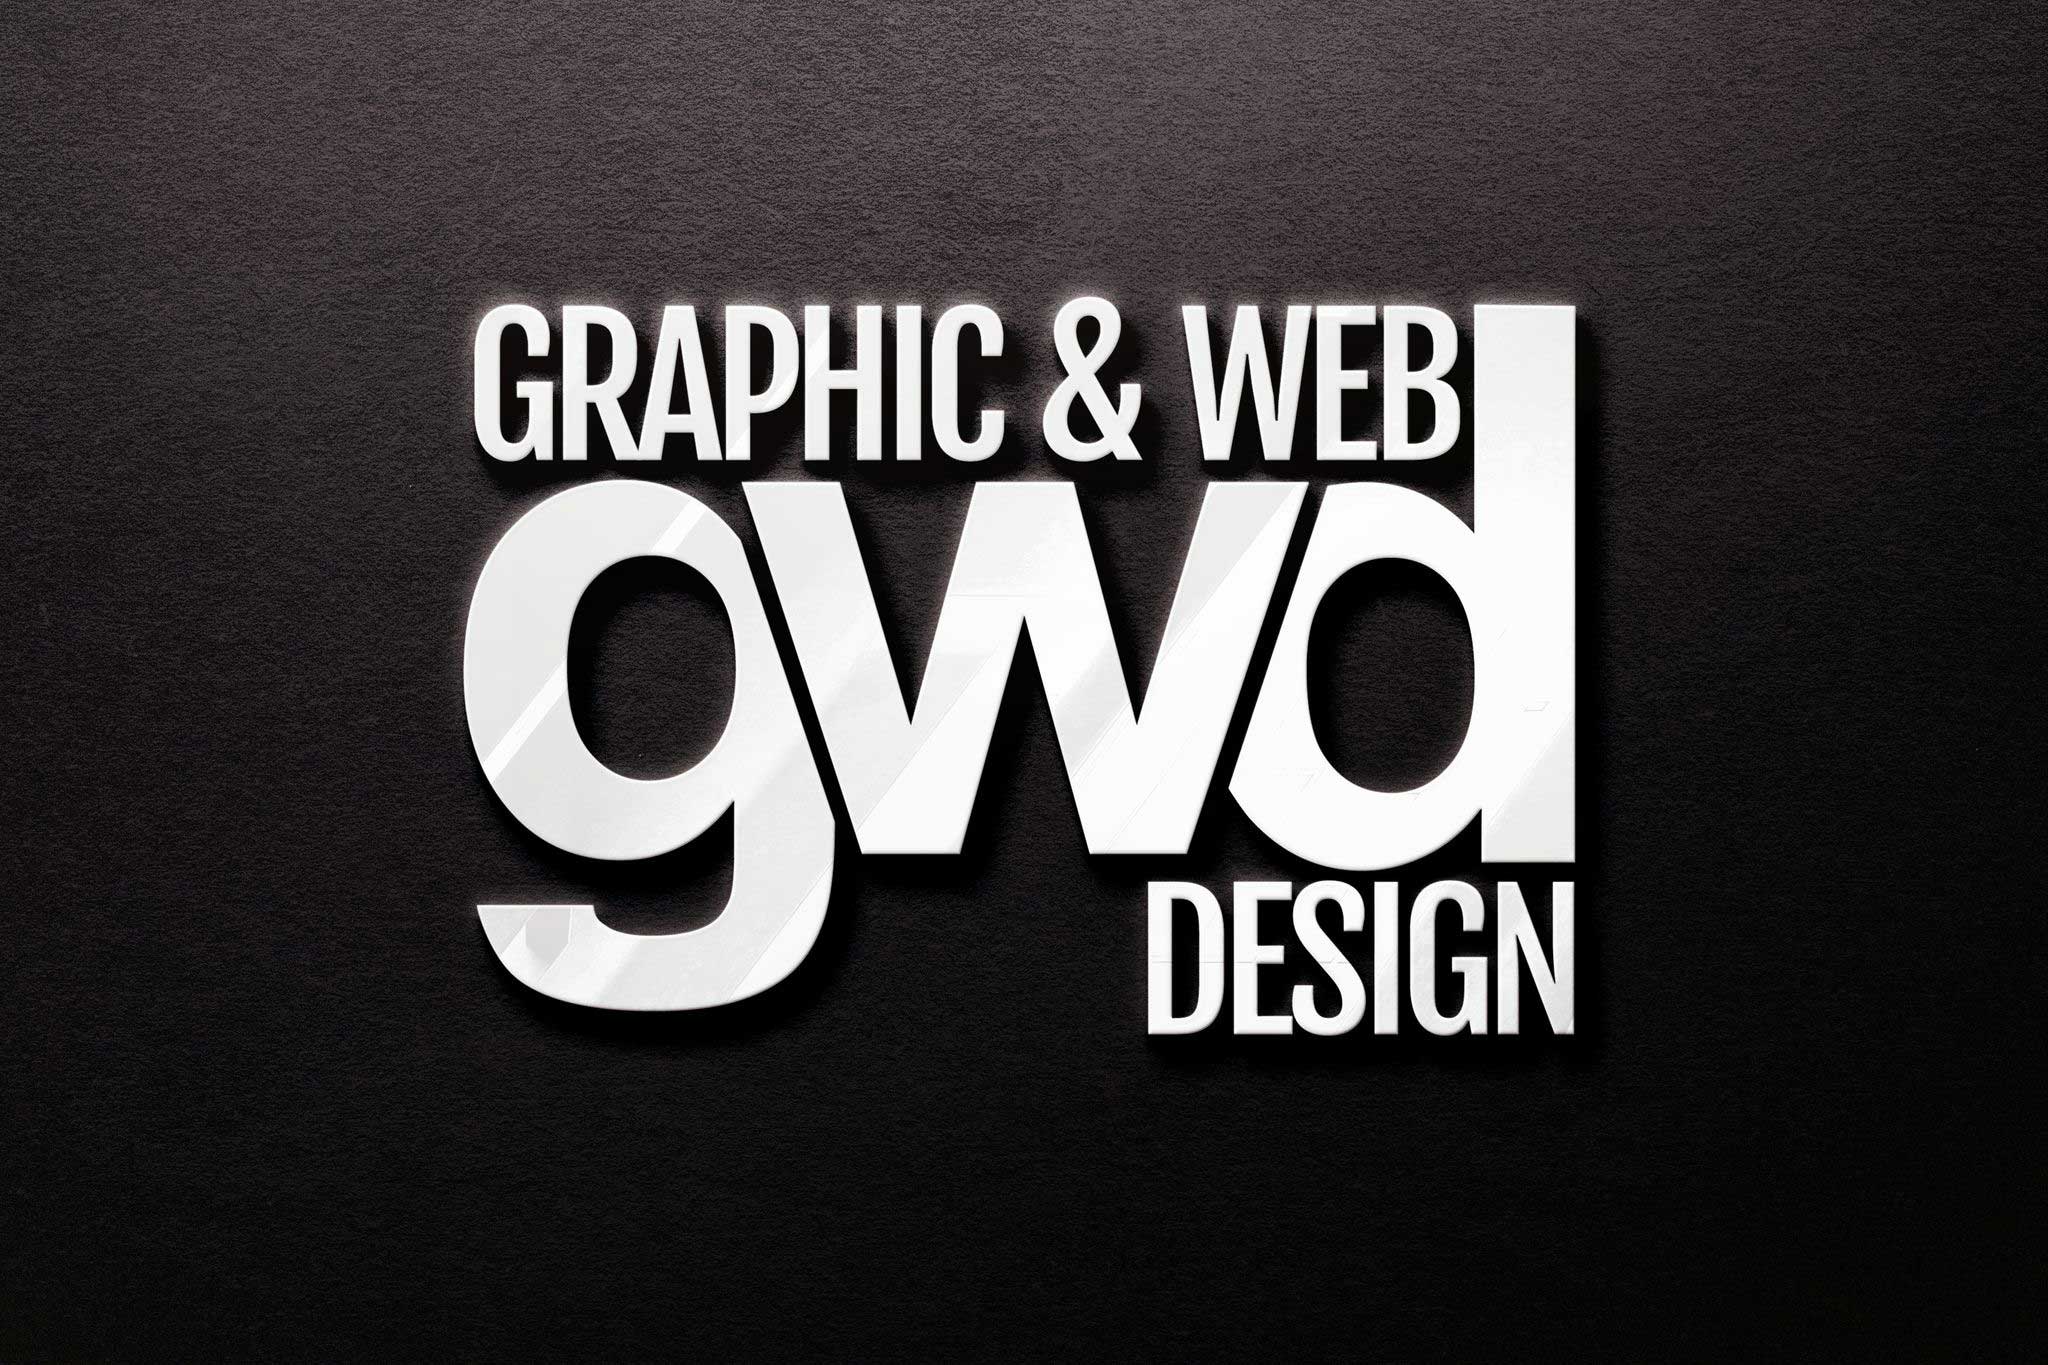 An application example of GWD logo on metal plate